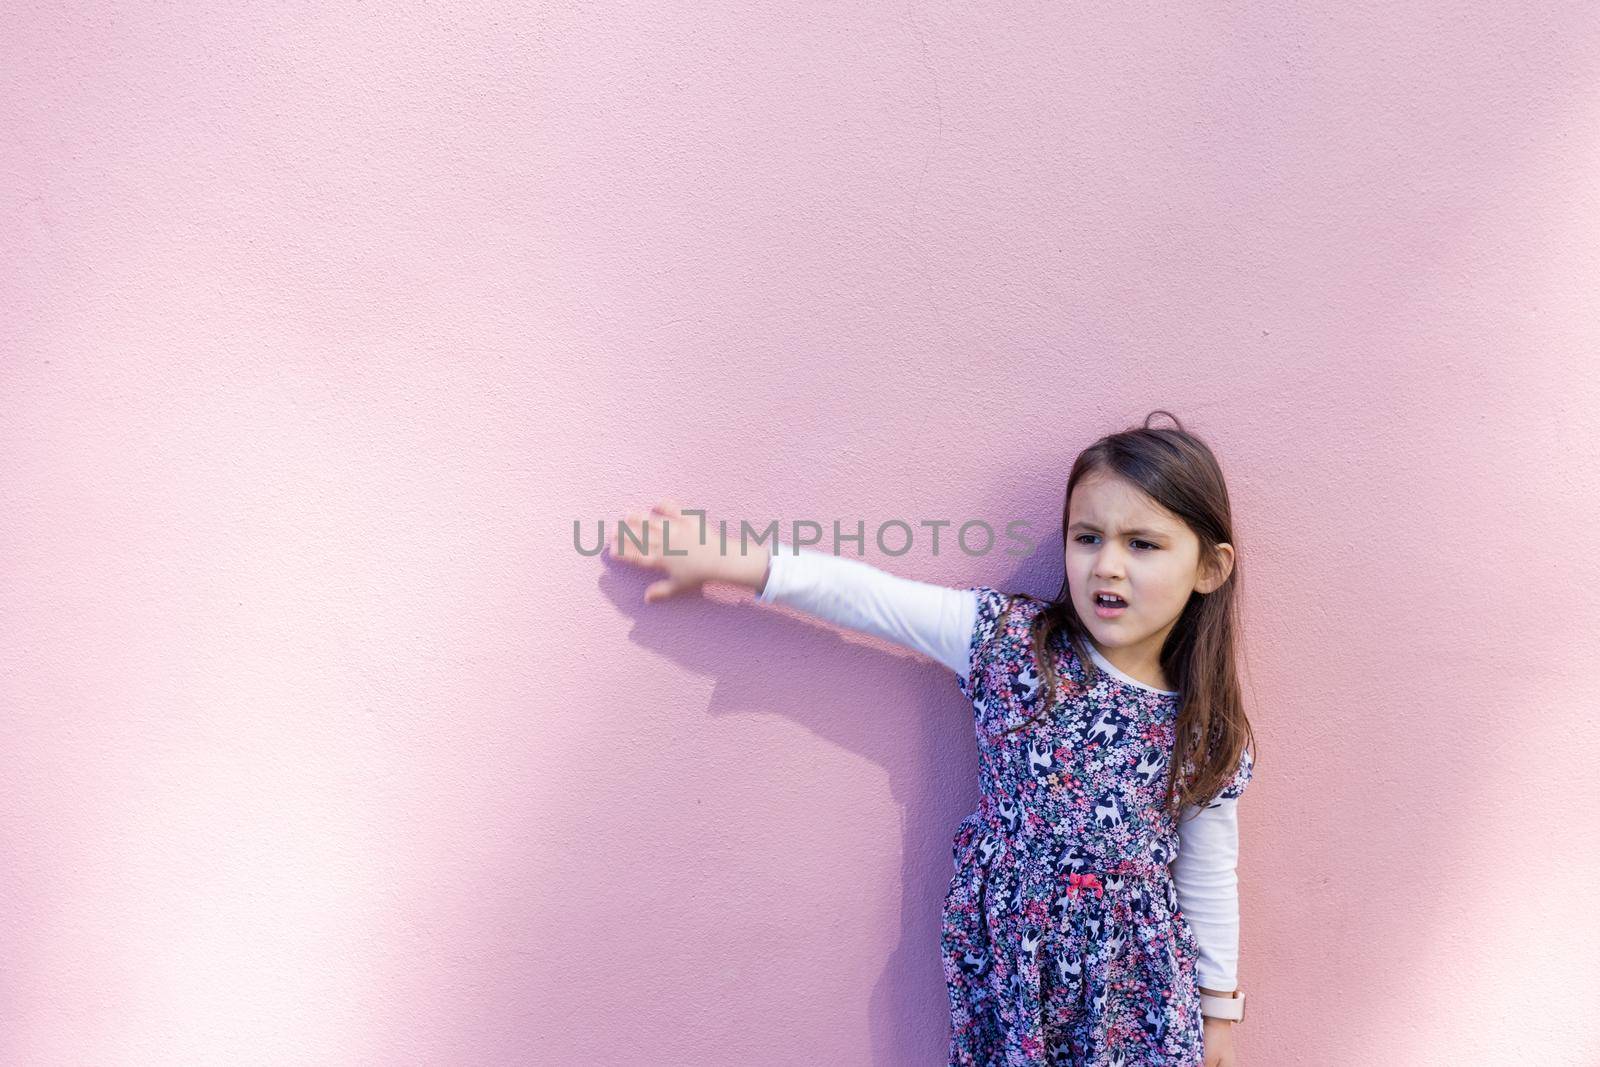 Adorable view of distressed-looking little girl wearing unicorn colorful dress with pink background. Portrait of cute young child touching a pink wall. Lovely kids outdoors